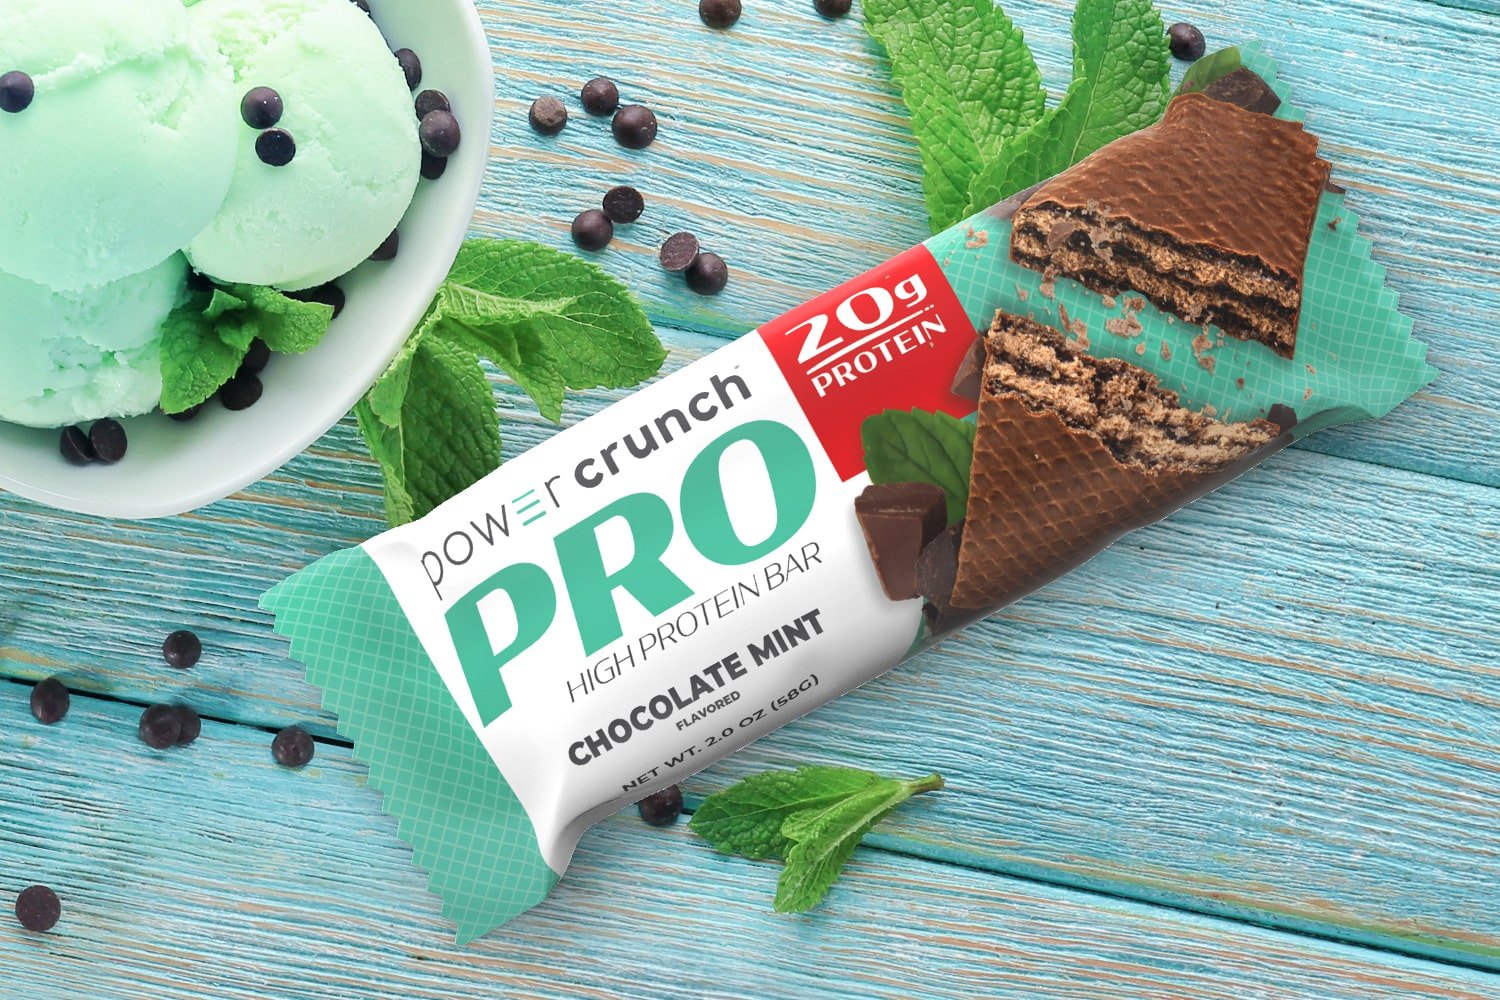 Chocolate Mint high protein bars as an on-the-go snack